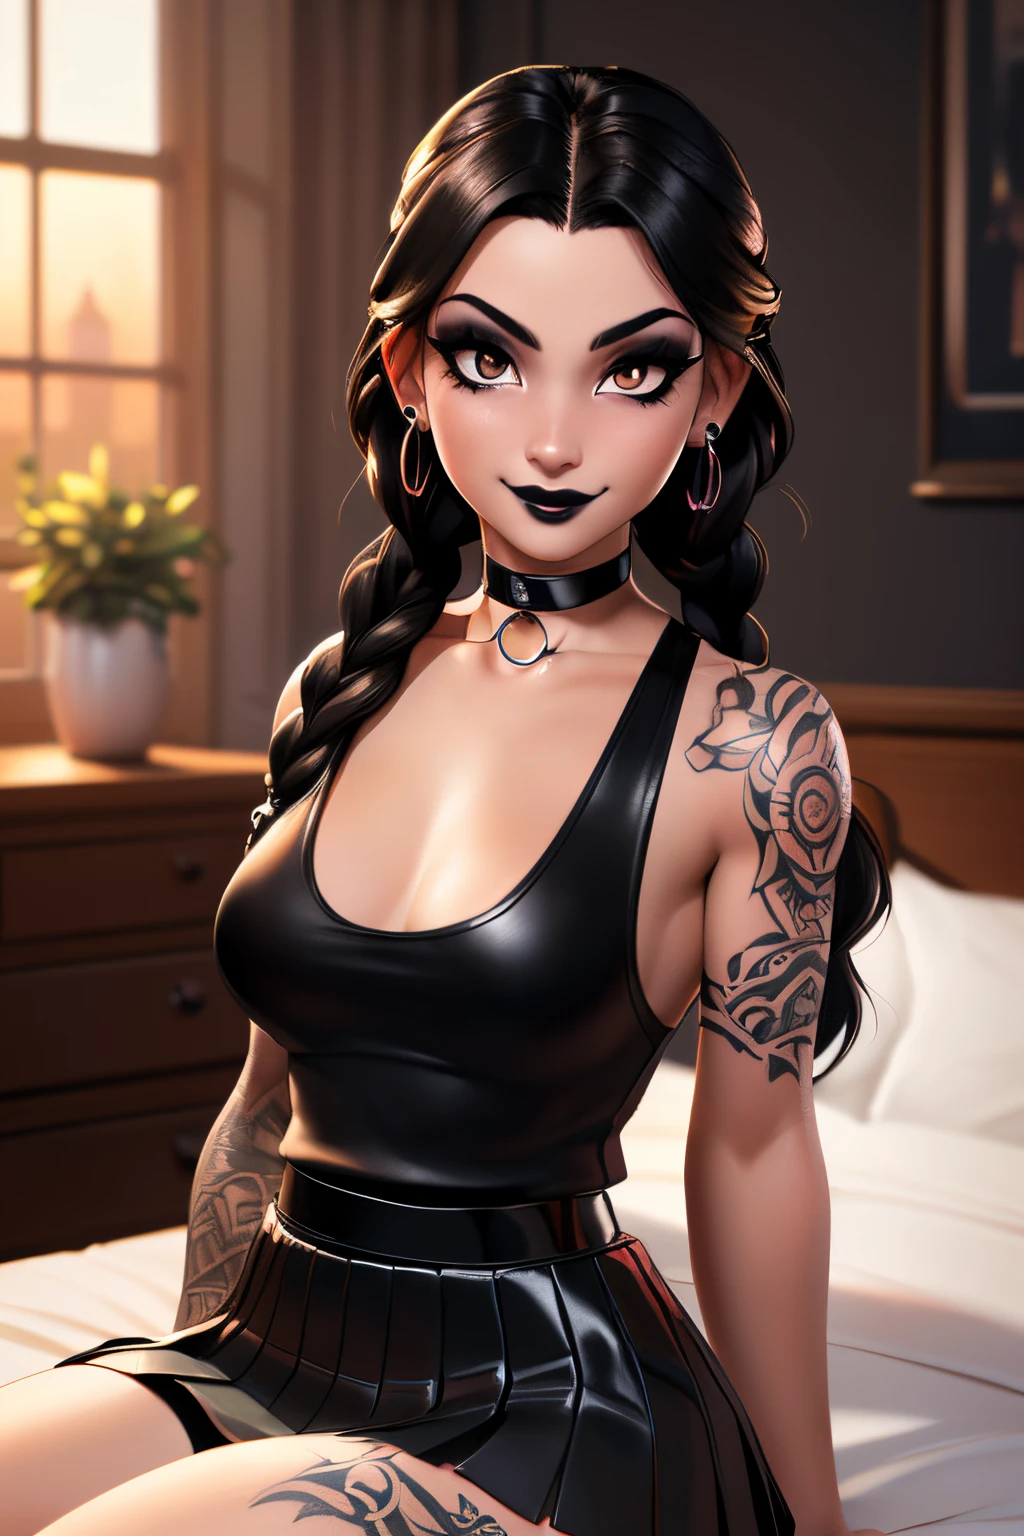 ((ultra quality)), ((tmasterpiece)), goth girl, ((long black hair braided into one braid), ((there are piercings and rings in the ears)), Beautiful cute face, beautiful female lips, ((dark makeup)), charming beauty, ((embarrassed expression)), (endearing smile), is looking at the camera, ((Skin color: white)), ((have tattoos on the body)), Body glare, ((detailed beautiful female eyes)), ((dark brown eyes)), beautiful female hands, ((perfect female figure)), ideal female body shapes, Beautiful waist, nice feet, big thighs, Beautiful butt, ((Subtle and beautiful)), sitting seductively on the bed ((seen from behind)), ((closeup face)), ((wearing a black leather skirt and a black sleeveless tank top, black choker around the neck, black stockings)), background: In a modern house, evening sunset, ((Depth of field)), ((high quality clear image)), ((crisp details)), ((higly detailed)), Realistic, Professional Photo Session, ((Clear Focus)), ((cartoon)), the anime, NSFW